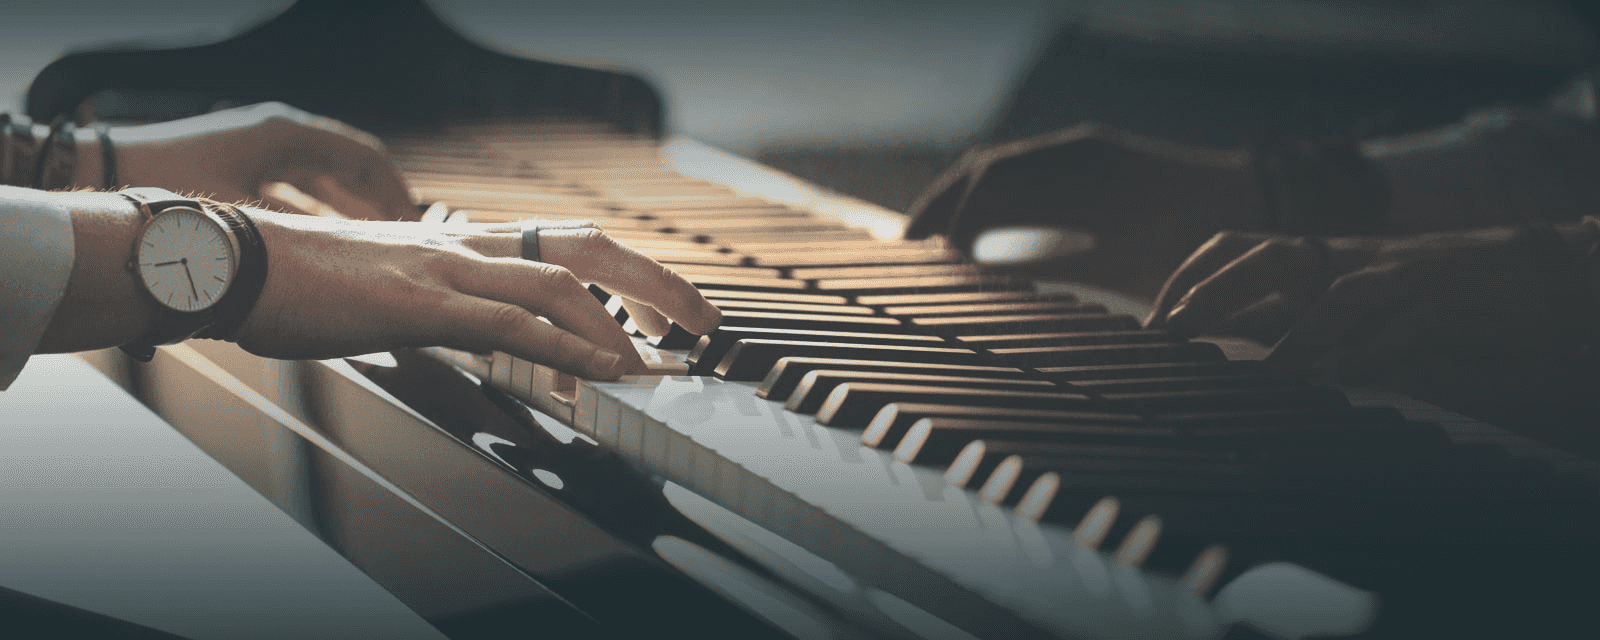 Piano lessons for all levels 